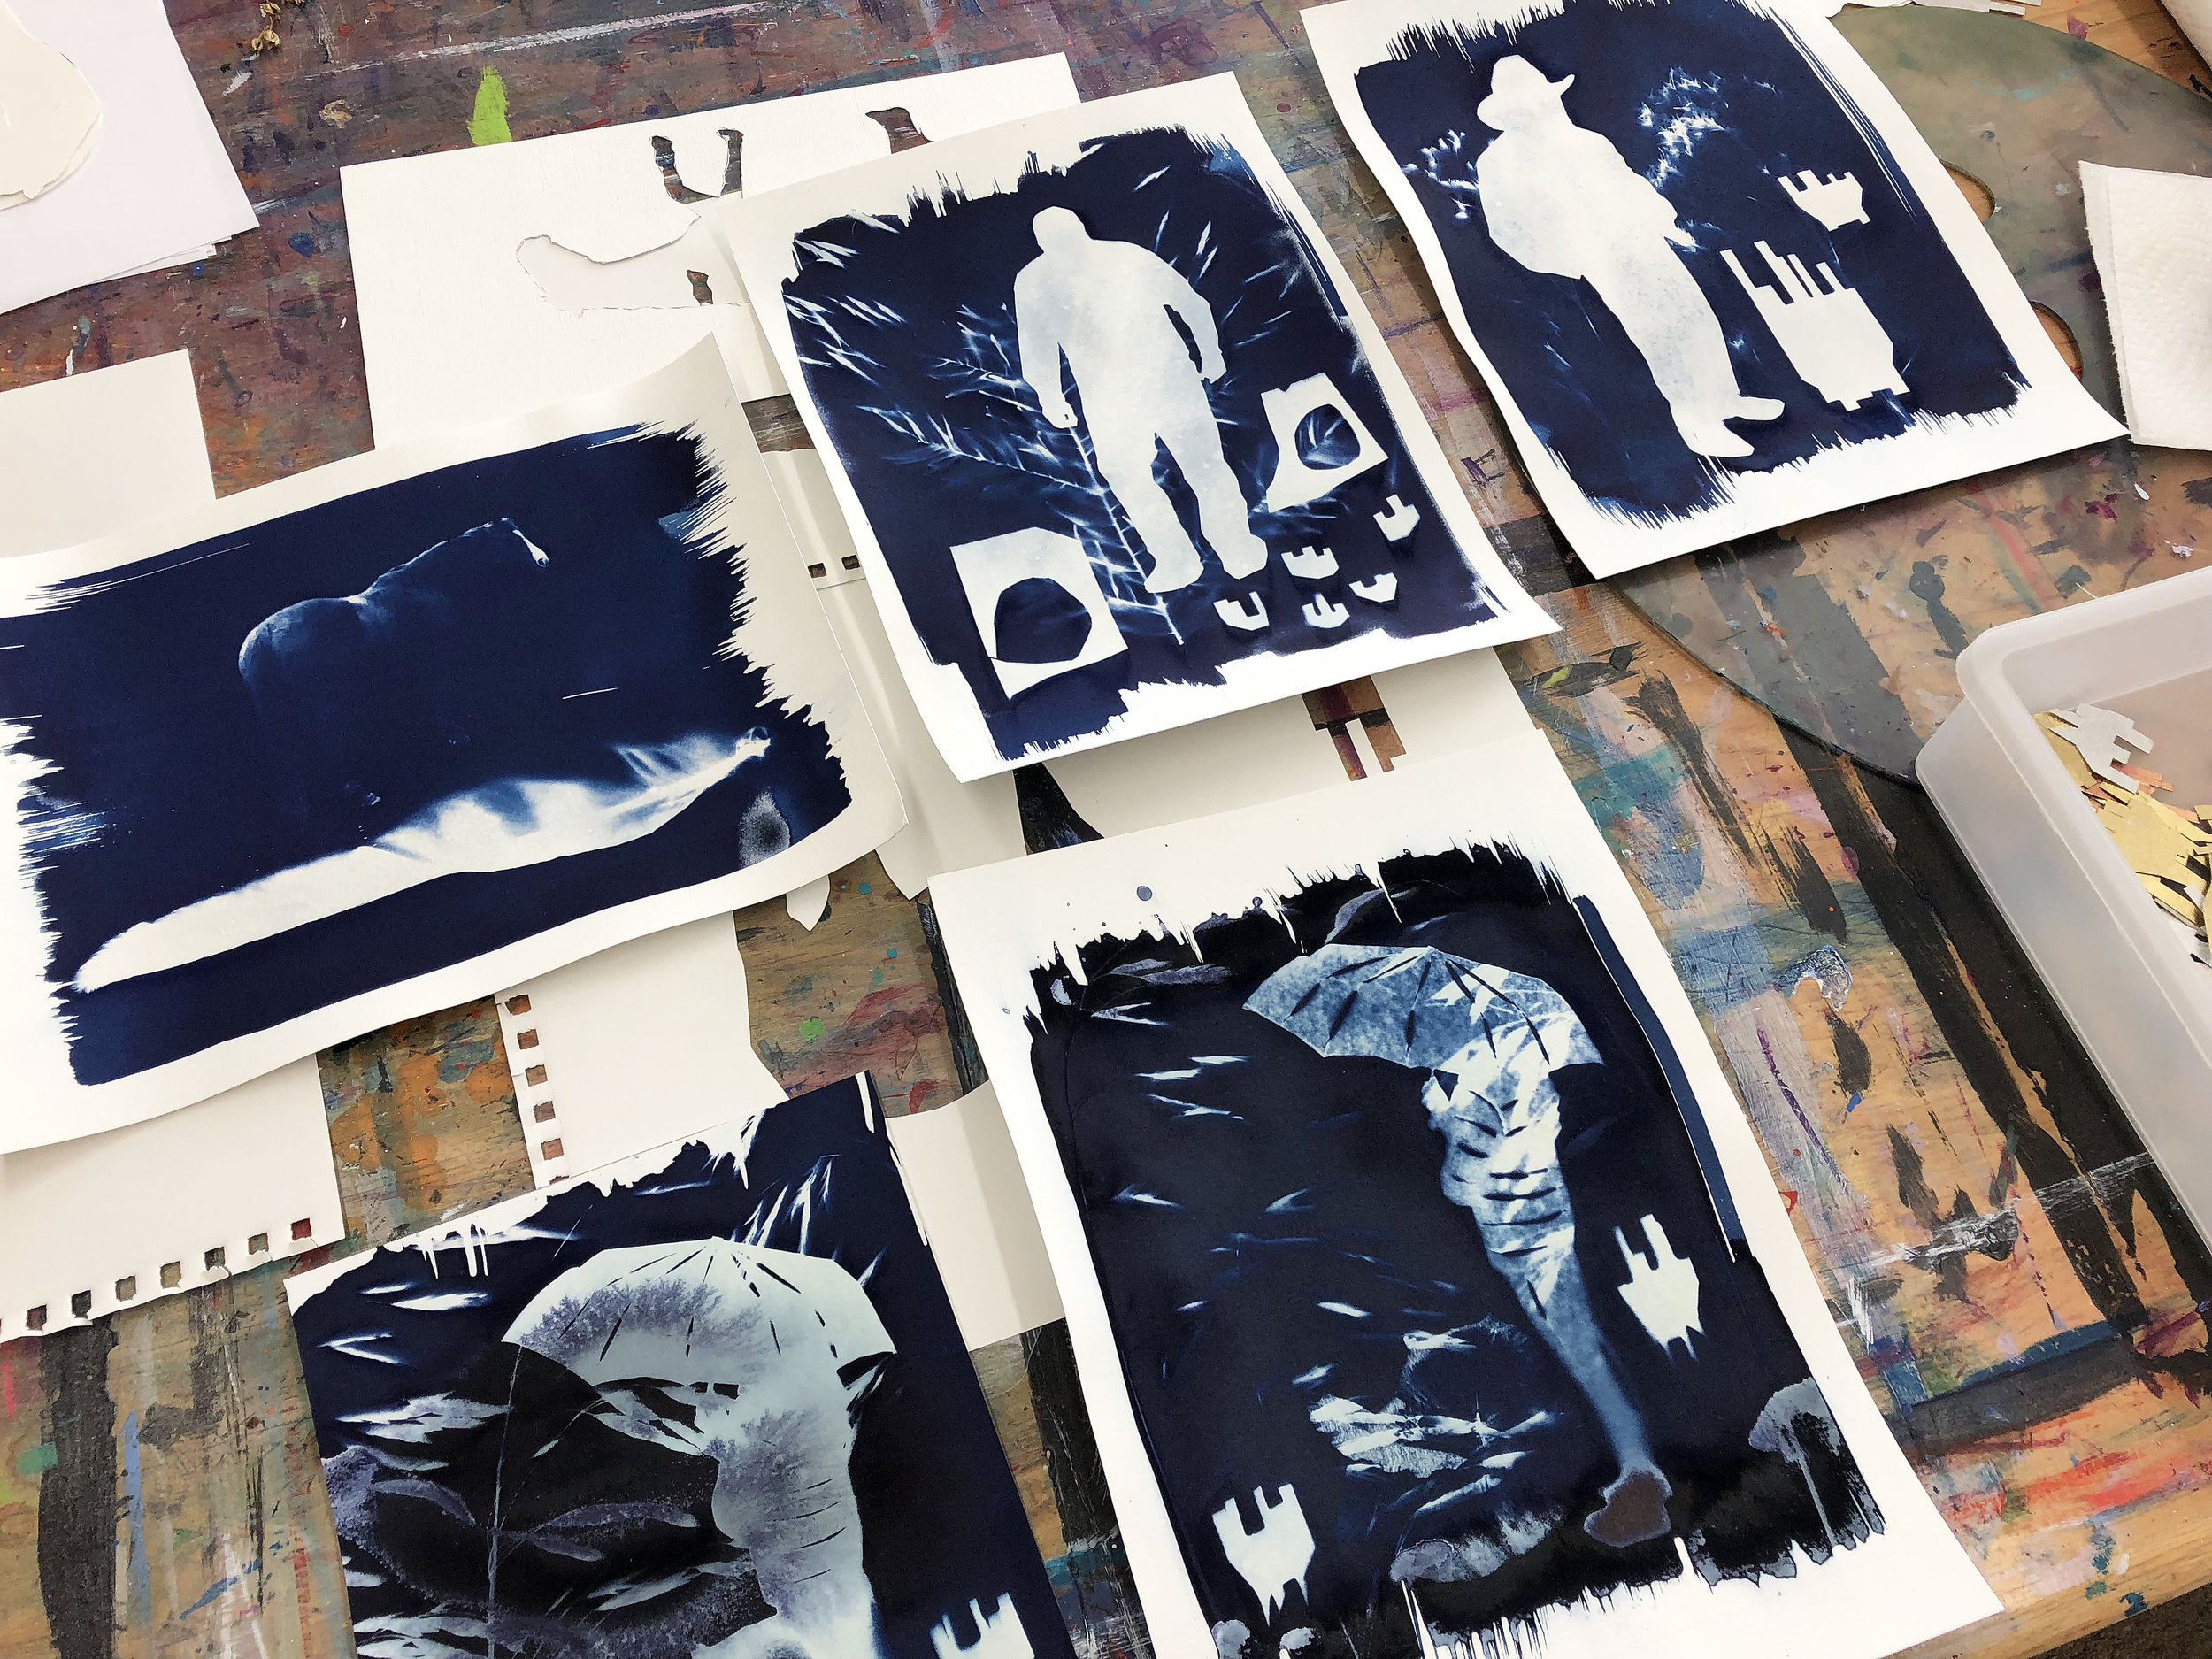 Gel Printing with Iridescents, and Organic Journal: Intuitive Collage 3 -  Shoshiplatypus